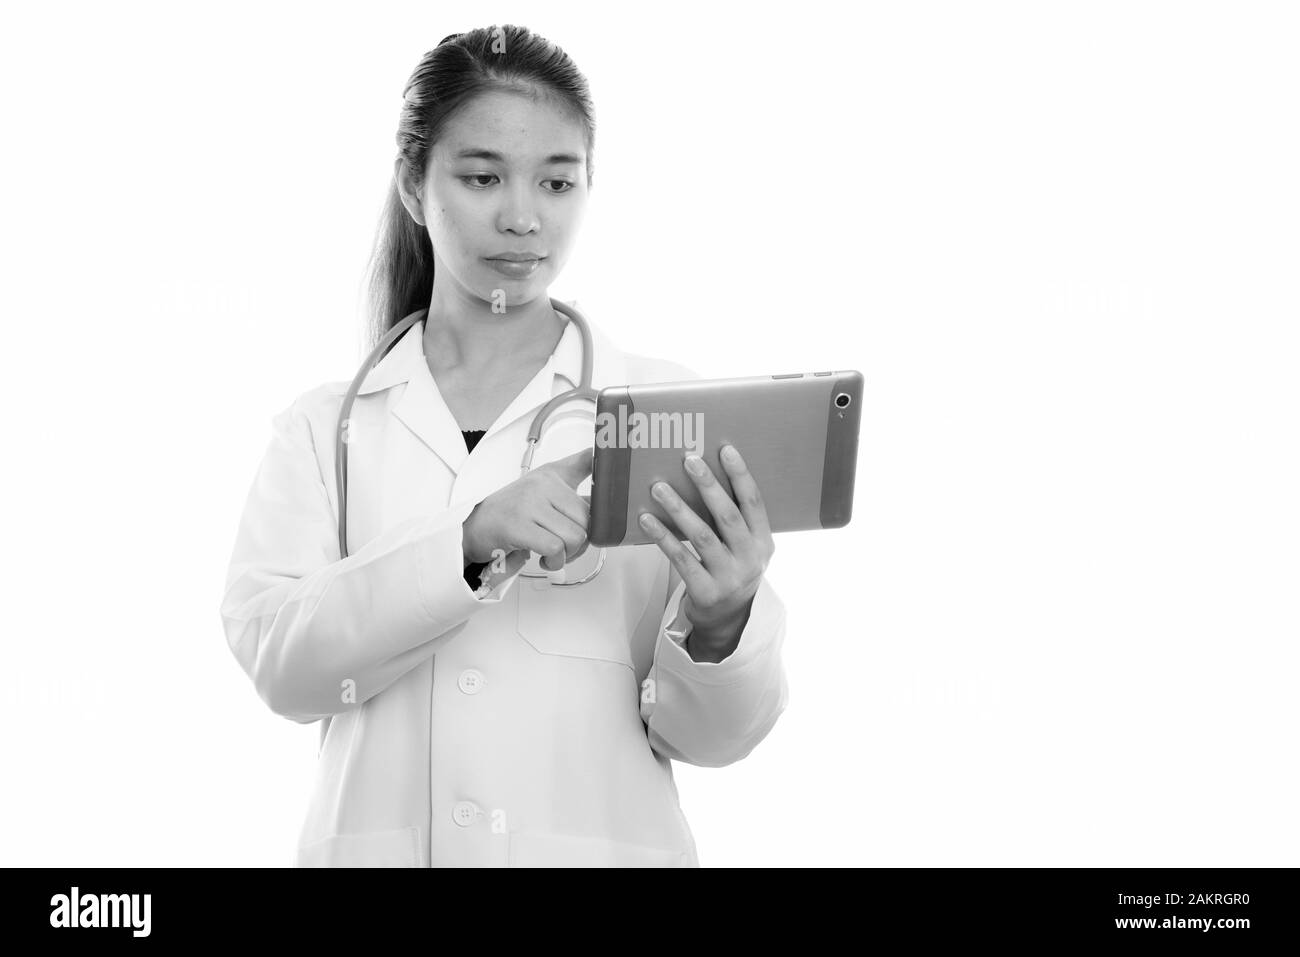 Studio shot of young Asian woman doctor using digital tablet Stock Photo